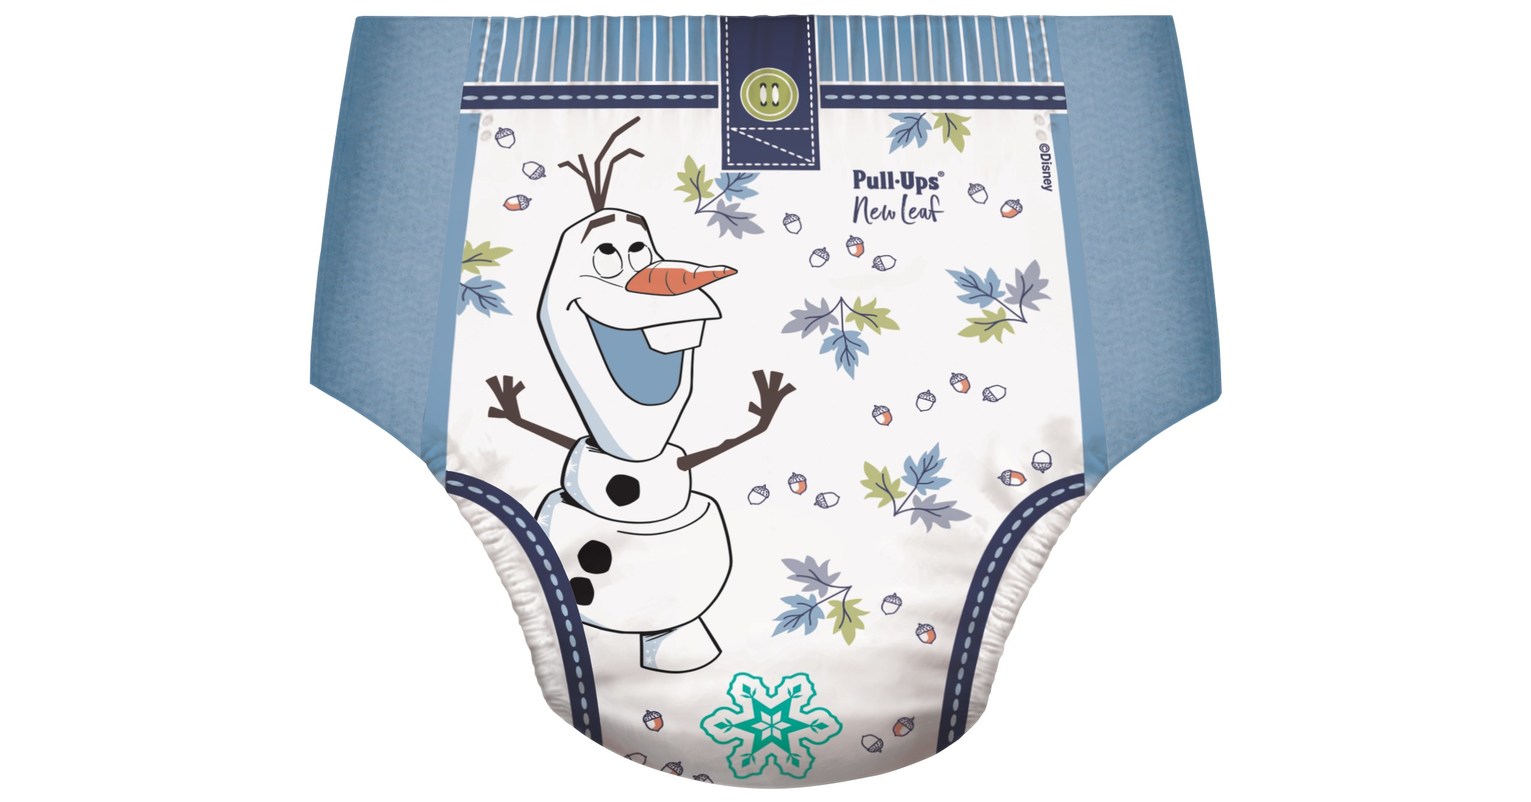 Pull-Ups® - Featuring Frozen 2 designs and made with plant-based  ingredients (28% by weight), Pull-Ups® New Leaf™ are designed to keep your  Big Kid feeling comfy and confident while potty training! Learn